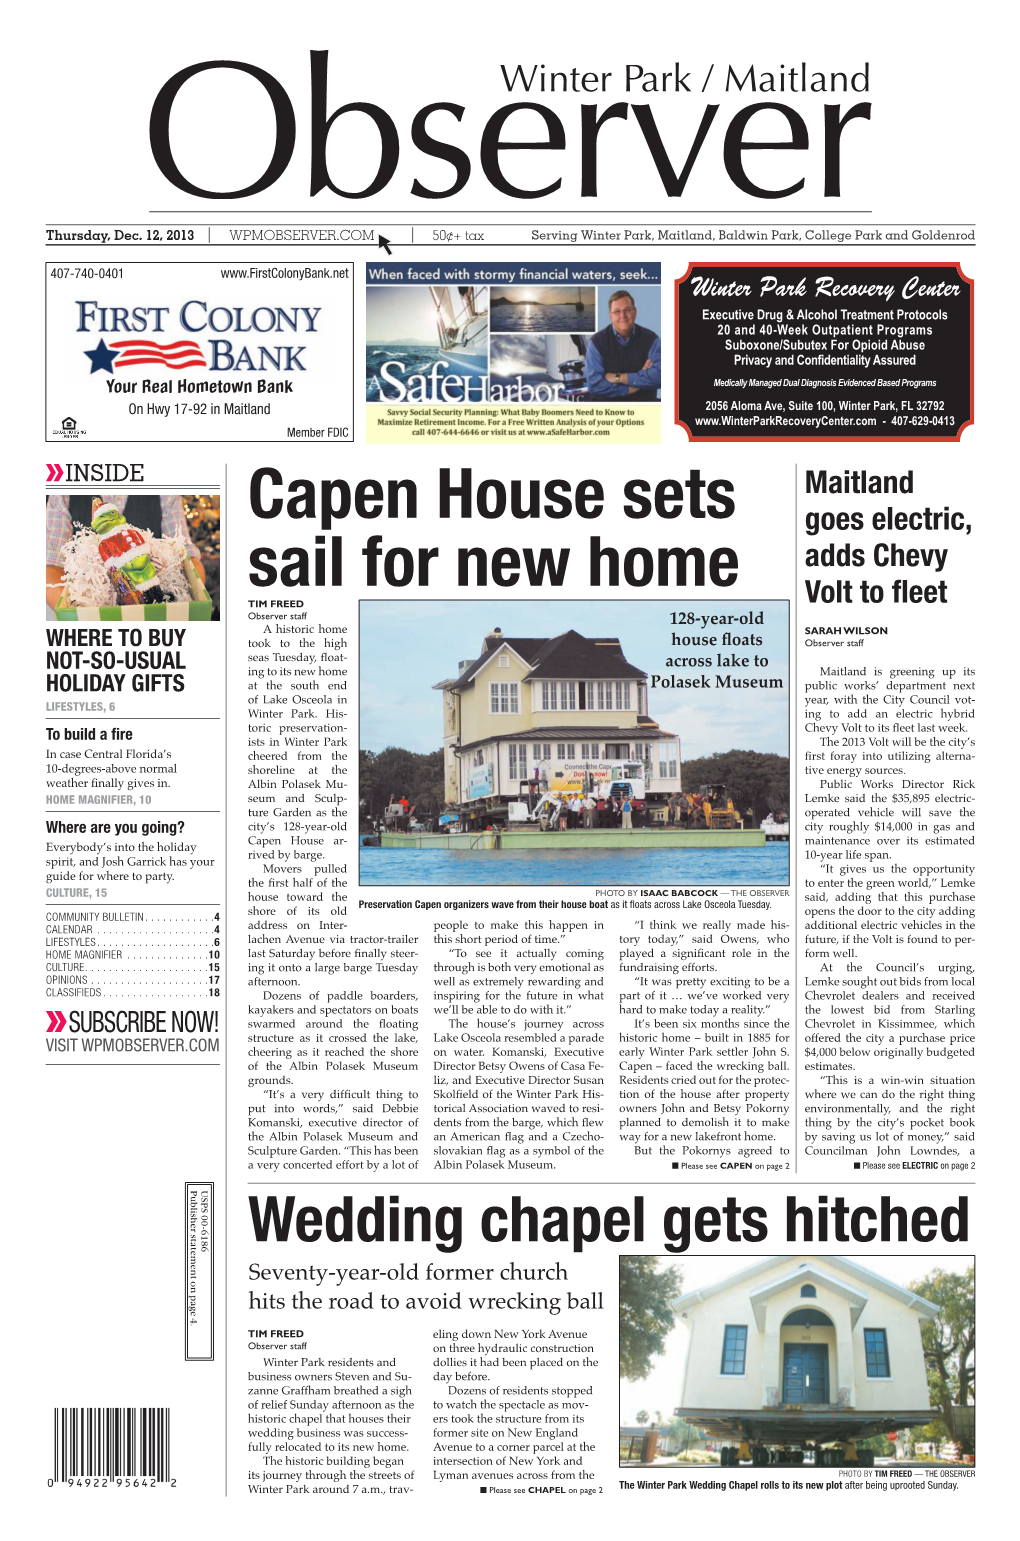 Capen House Sets Sail for New Home